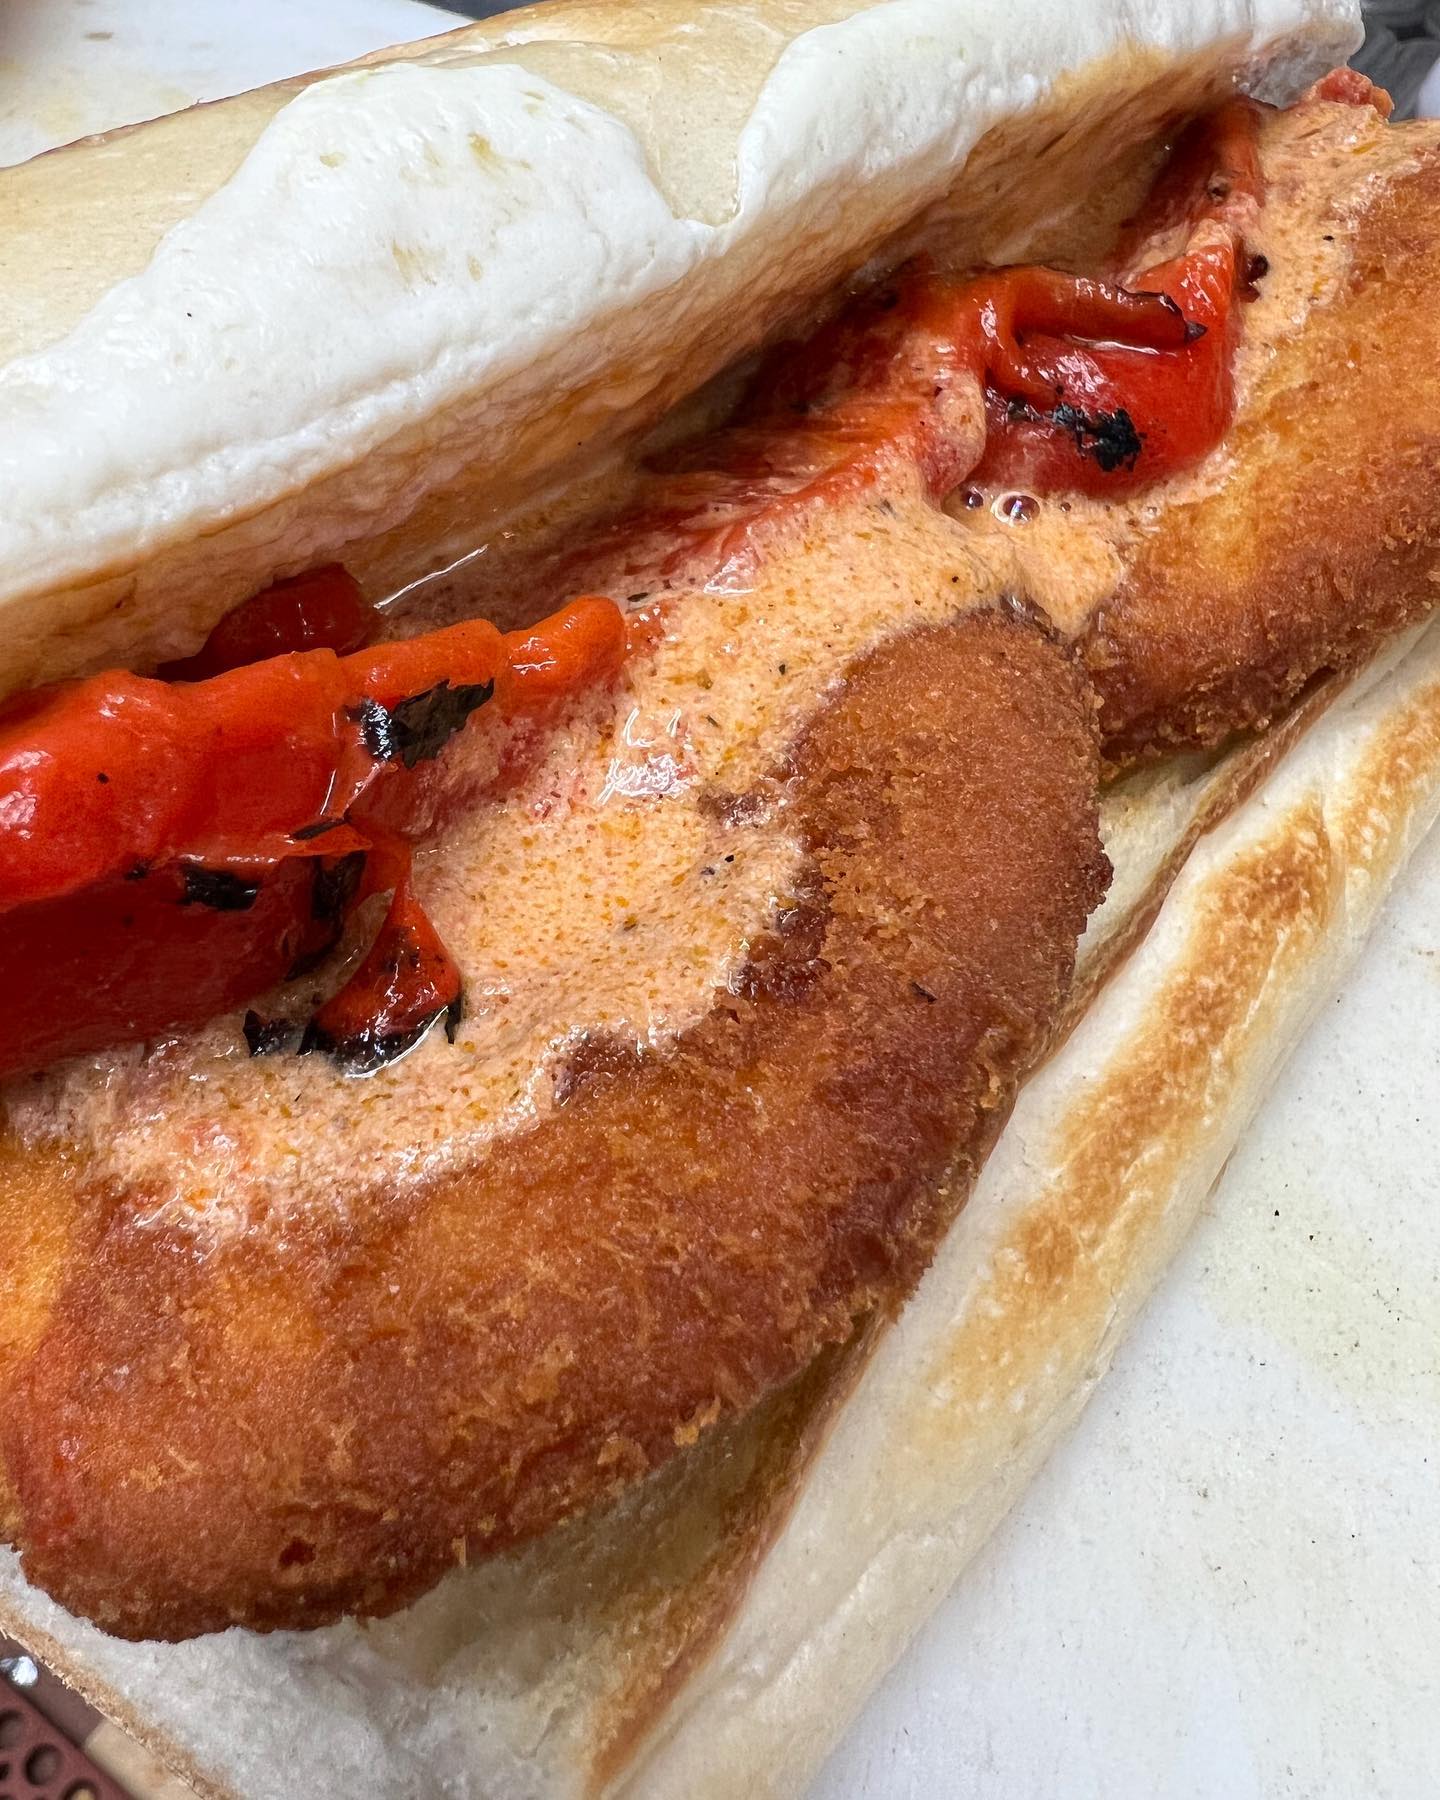 Special today inspired by @thetipsycritics looking 🔥! Breaded chicken cutlet, vodka sauce, melted mozzarella, and roasted red peppers on an Italian roll. Come try it today and let us know (and @thetipsycritics) what you think!